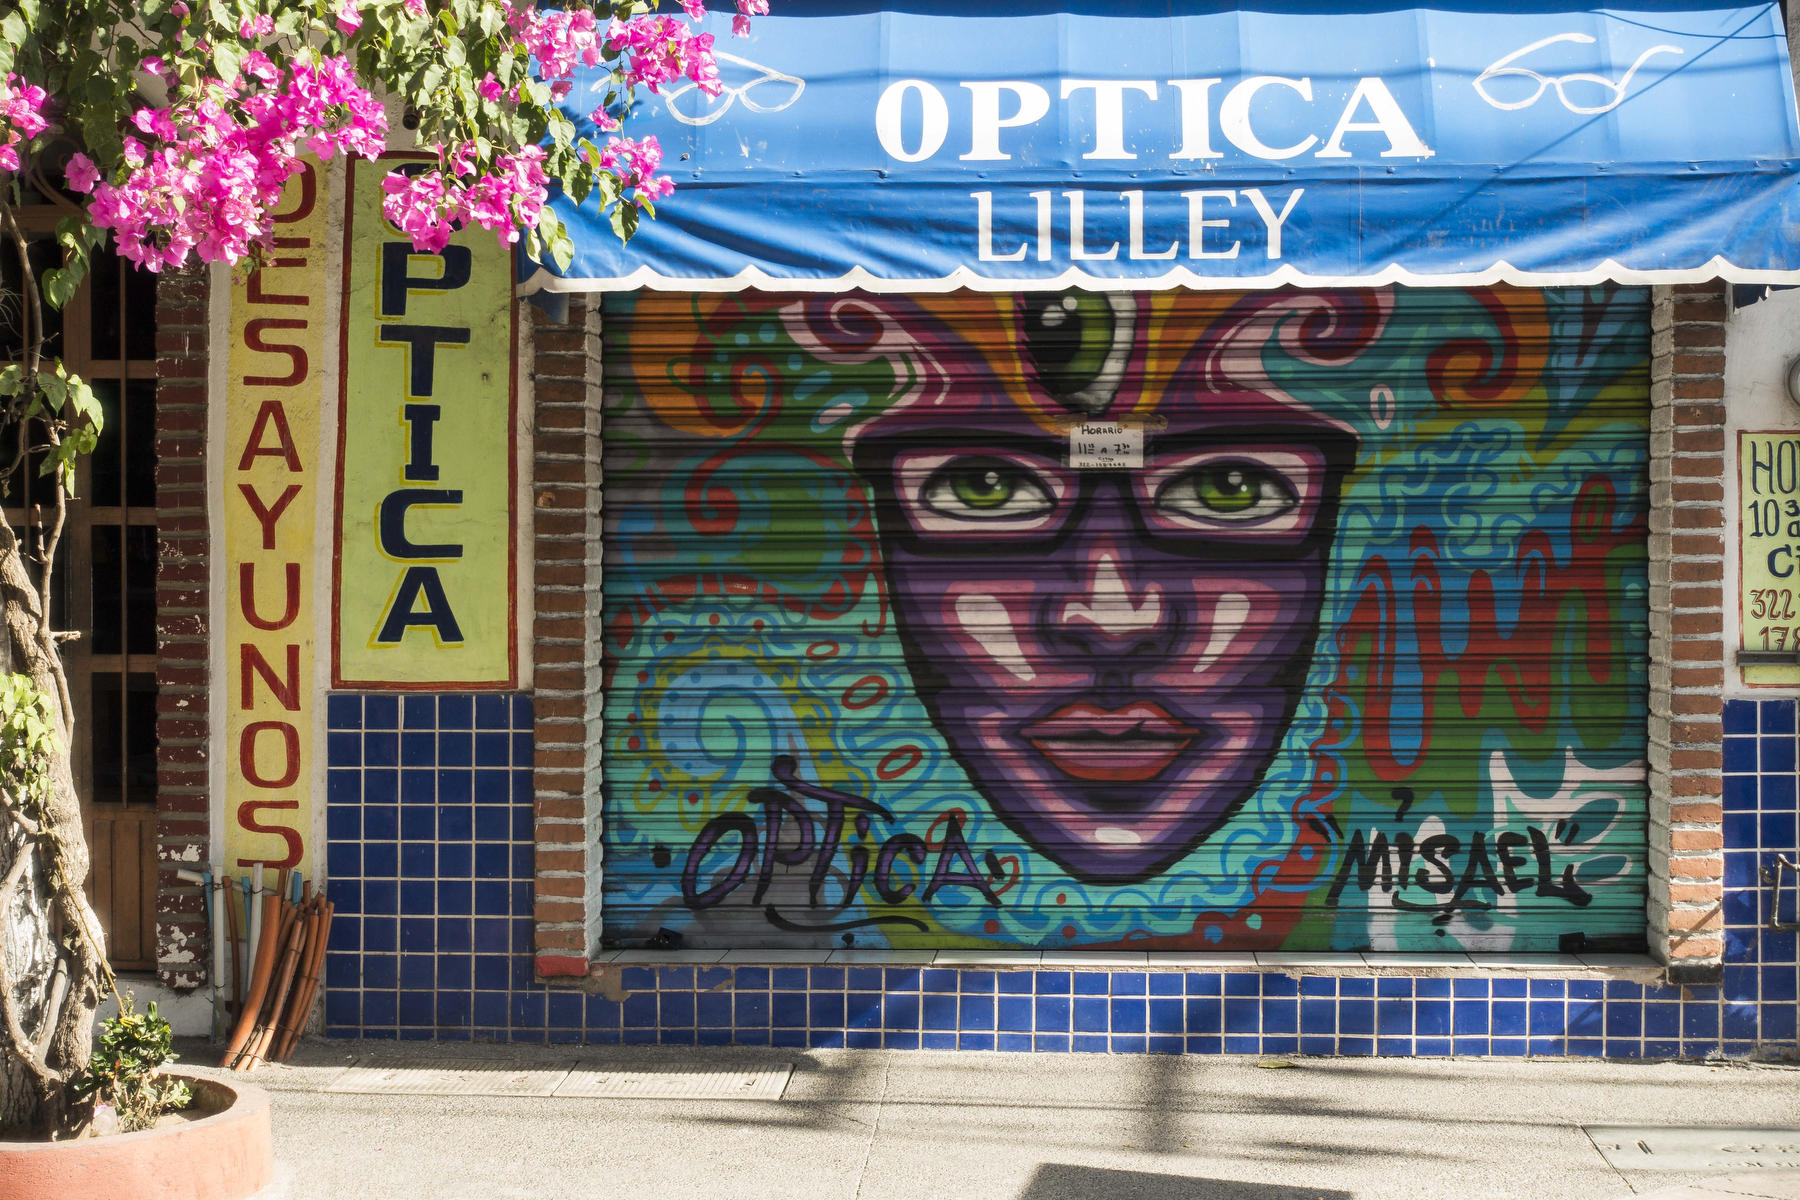 A face wearing glasses decorates the shutters of an optical store in Old Town. : PUERTO VALLARTA - Wall Art & Bicycle Tour : Viviane Moos |  Documentary Photographer